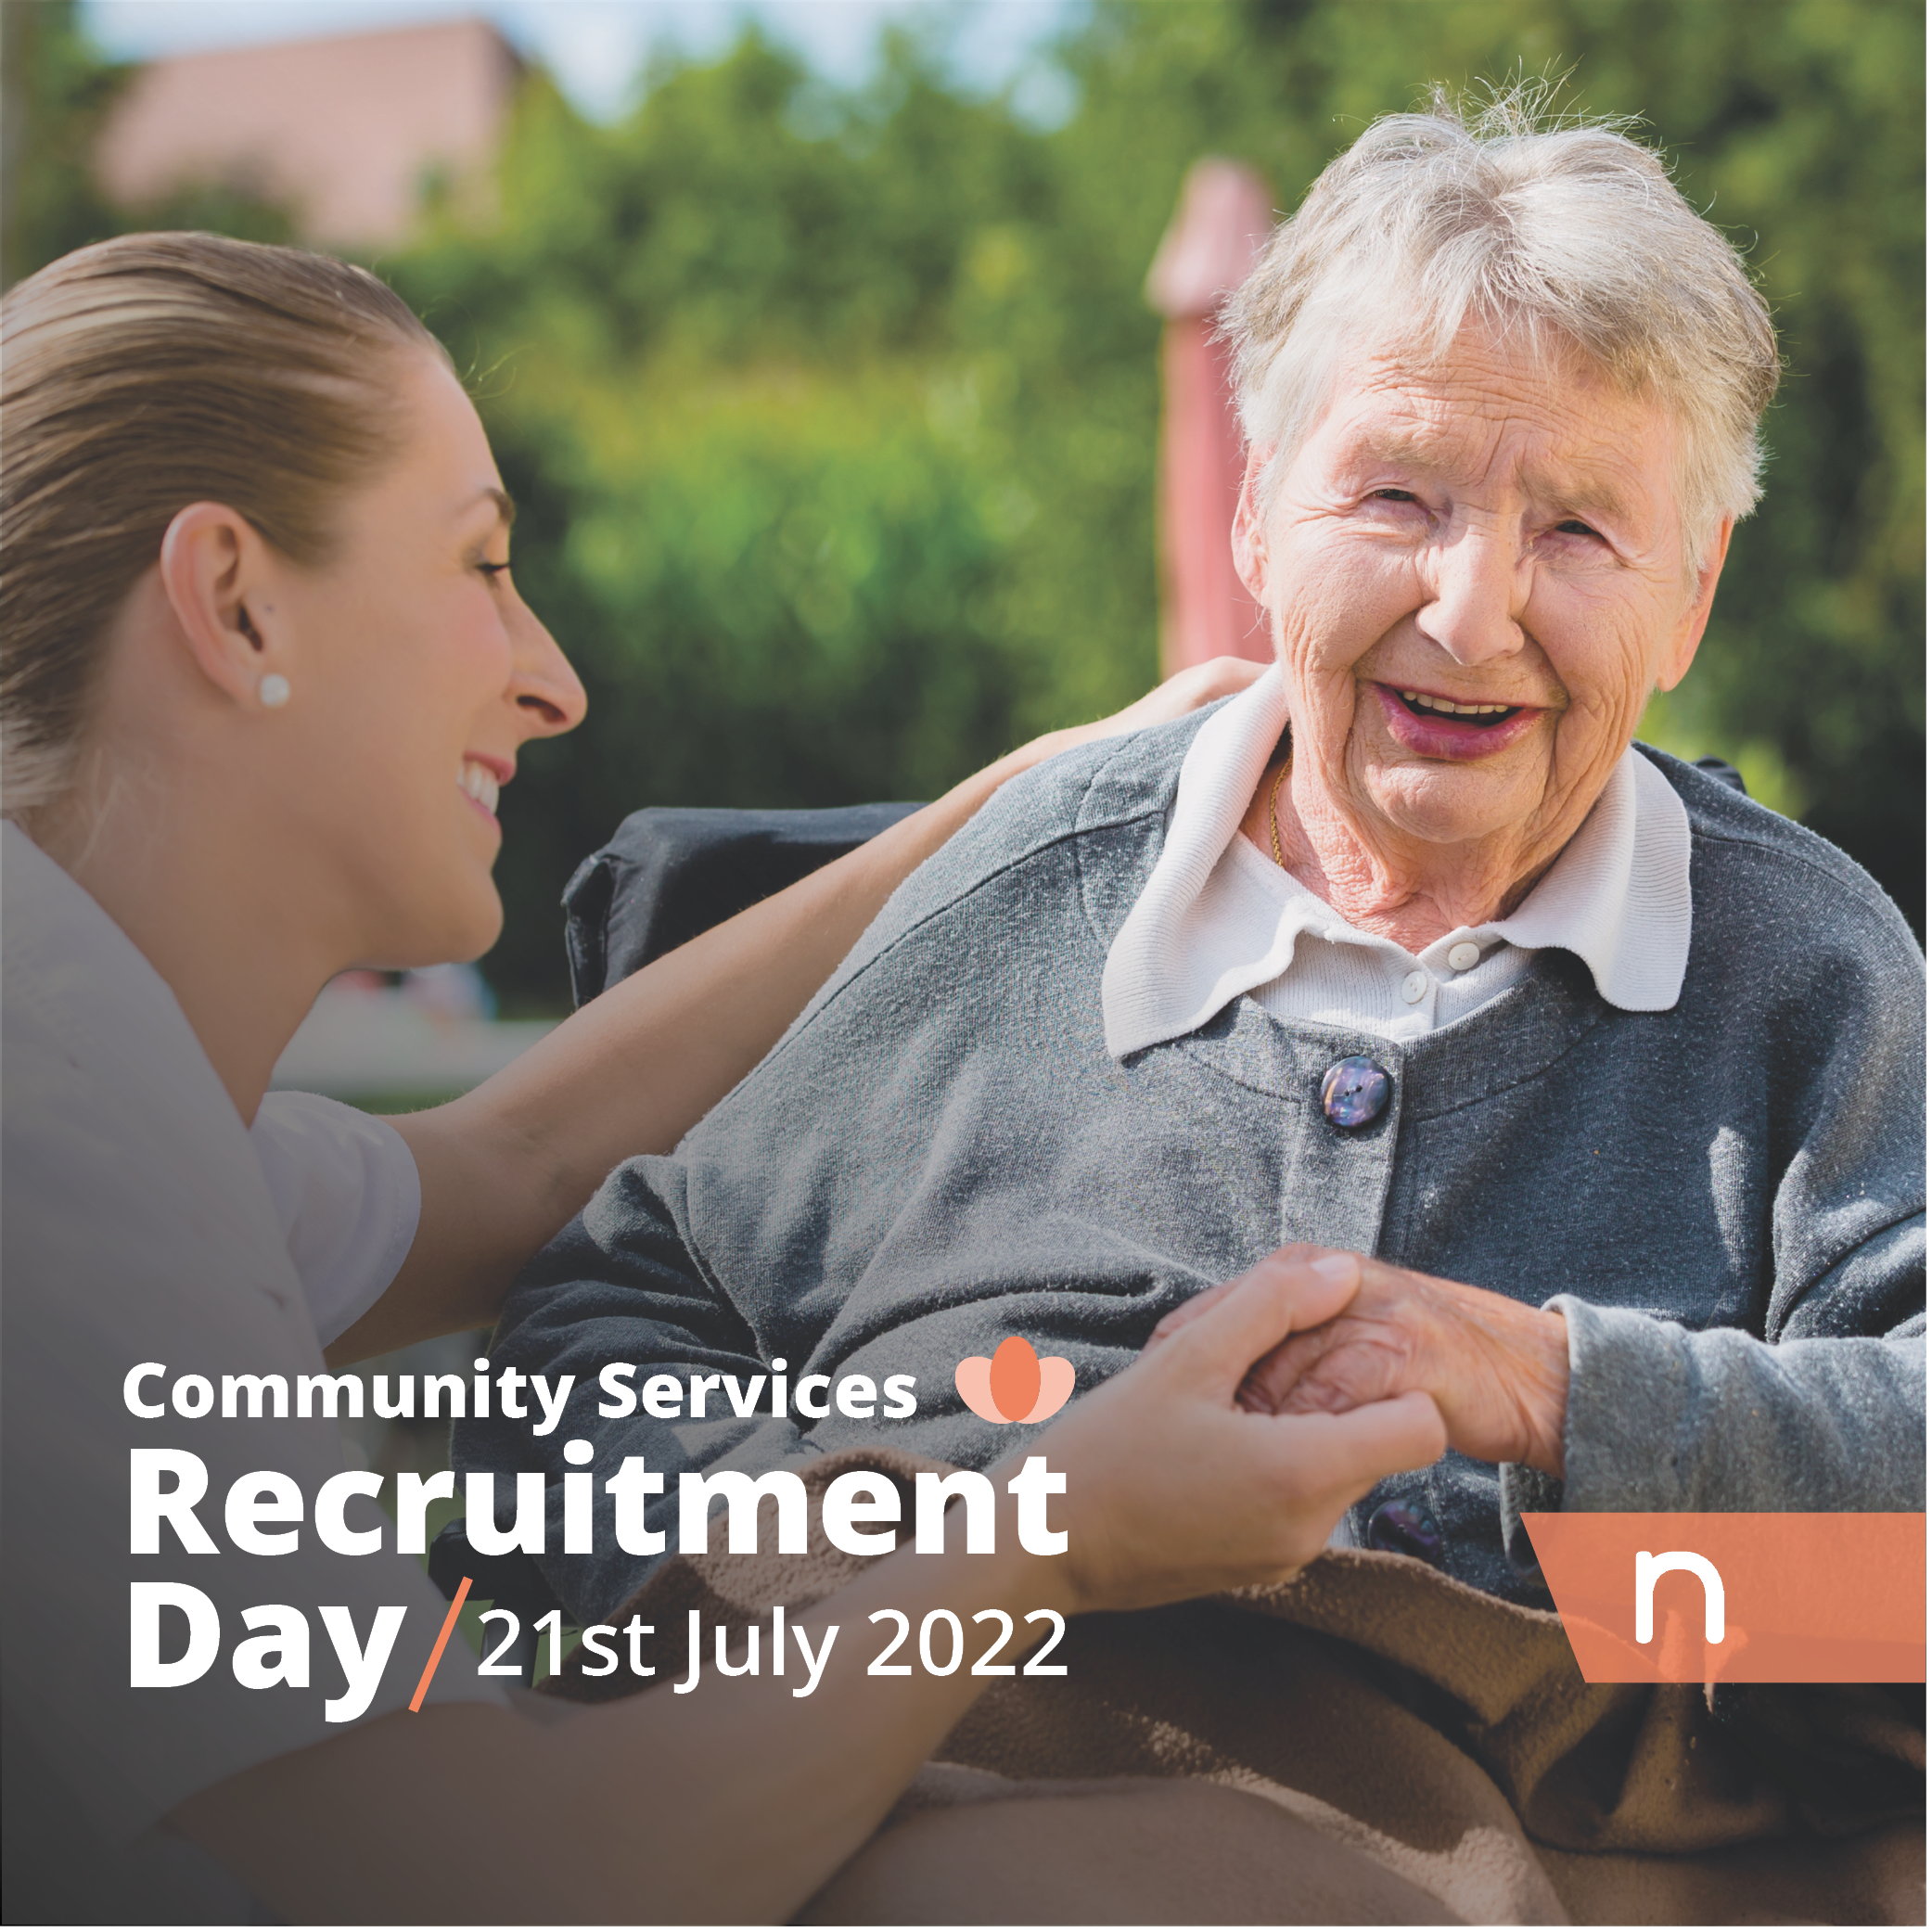 Image shows a carer and an elderly beneficiary, with text reading "Community Service Recruitment Day 21st July 2022"